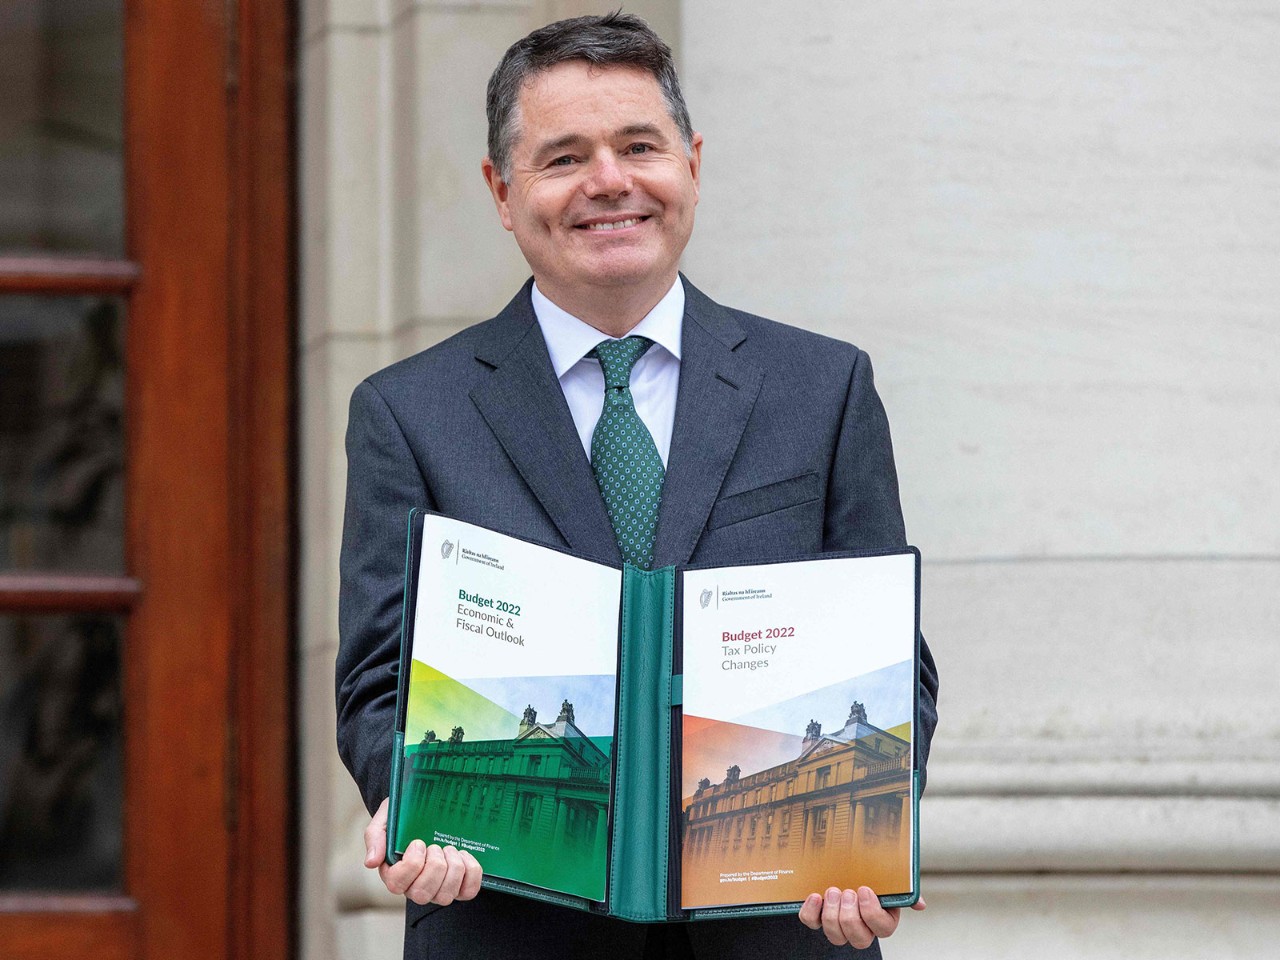 In Budget 2022, finance minister Paschal Donohoe confirmed the corporate tax rate for Irish multinationals will rise to 15% to comply with the OECD/G20 agreement on international tax reform